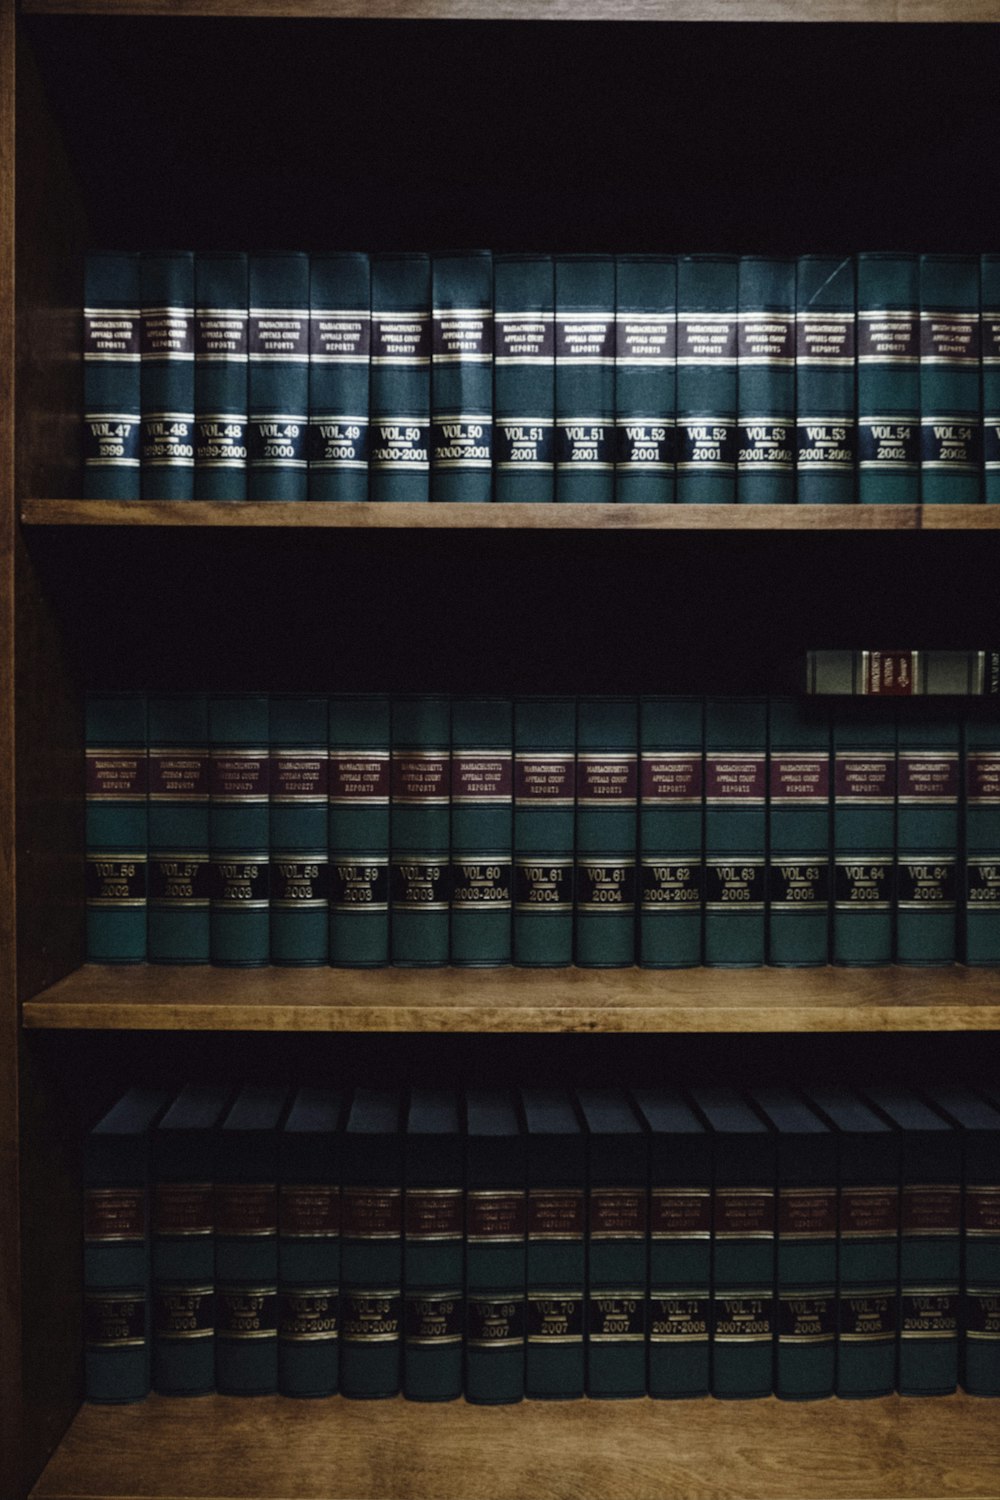 Law Books Pictures | Download Free Images on Unsplash